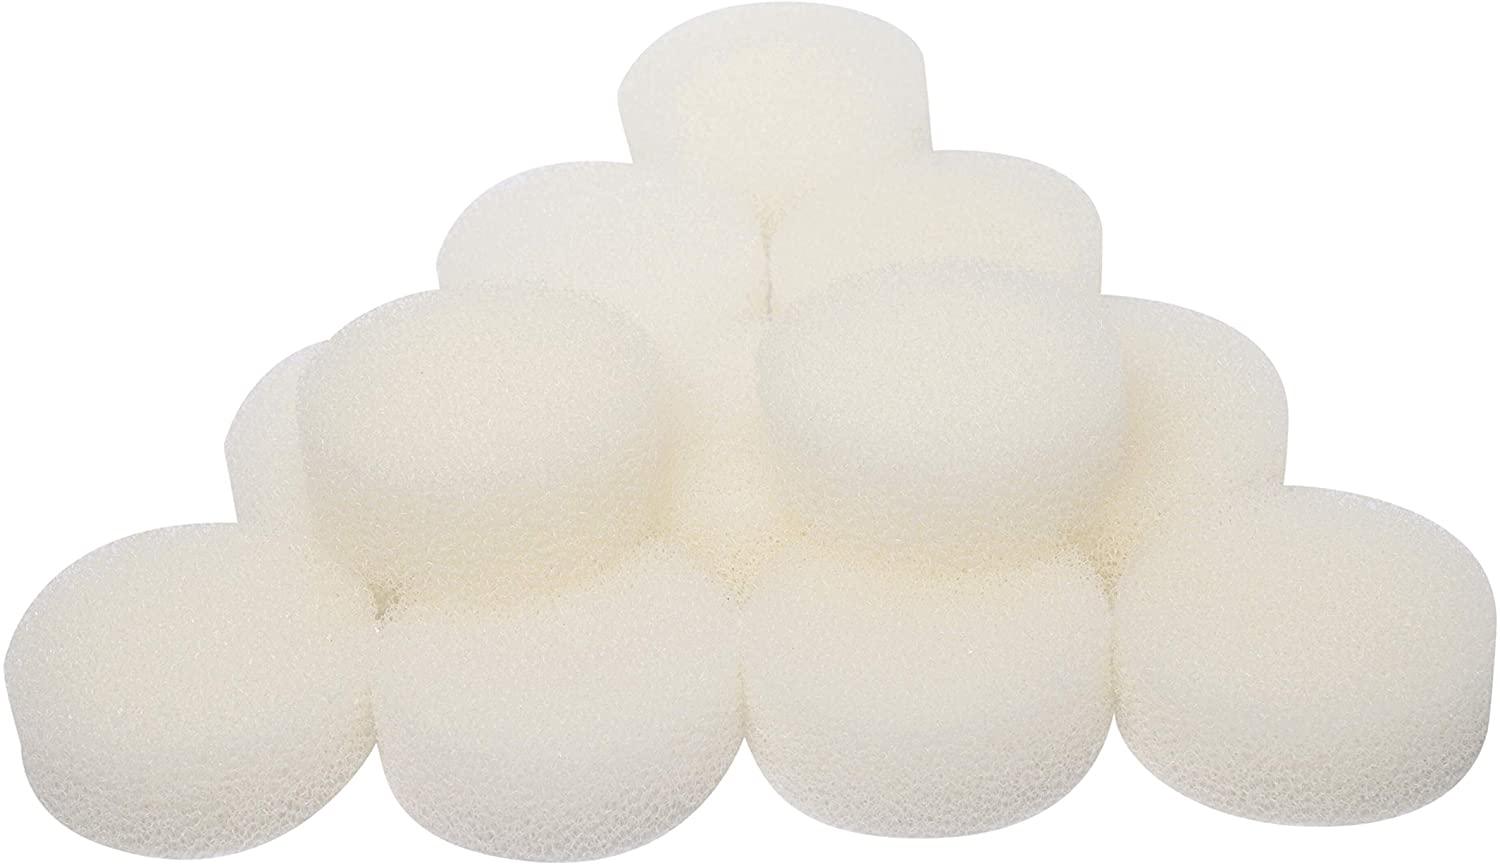 LTWHOME Foam Filter fit for 2618060 Cartridges Aquaball 45/2206, Biopower 160/200 / 240 (Pack of 12)